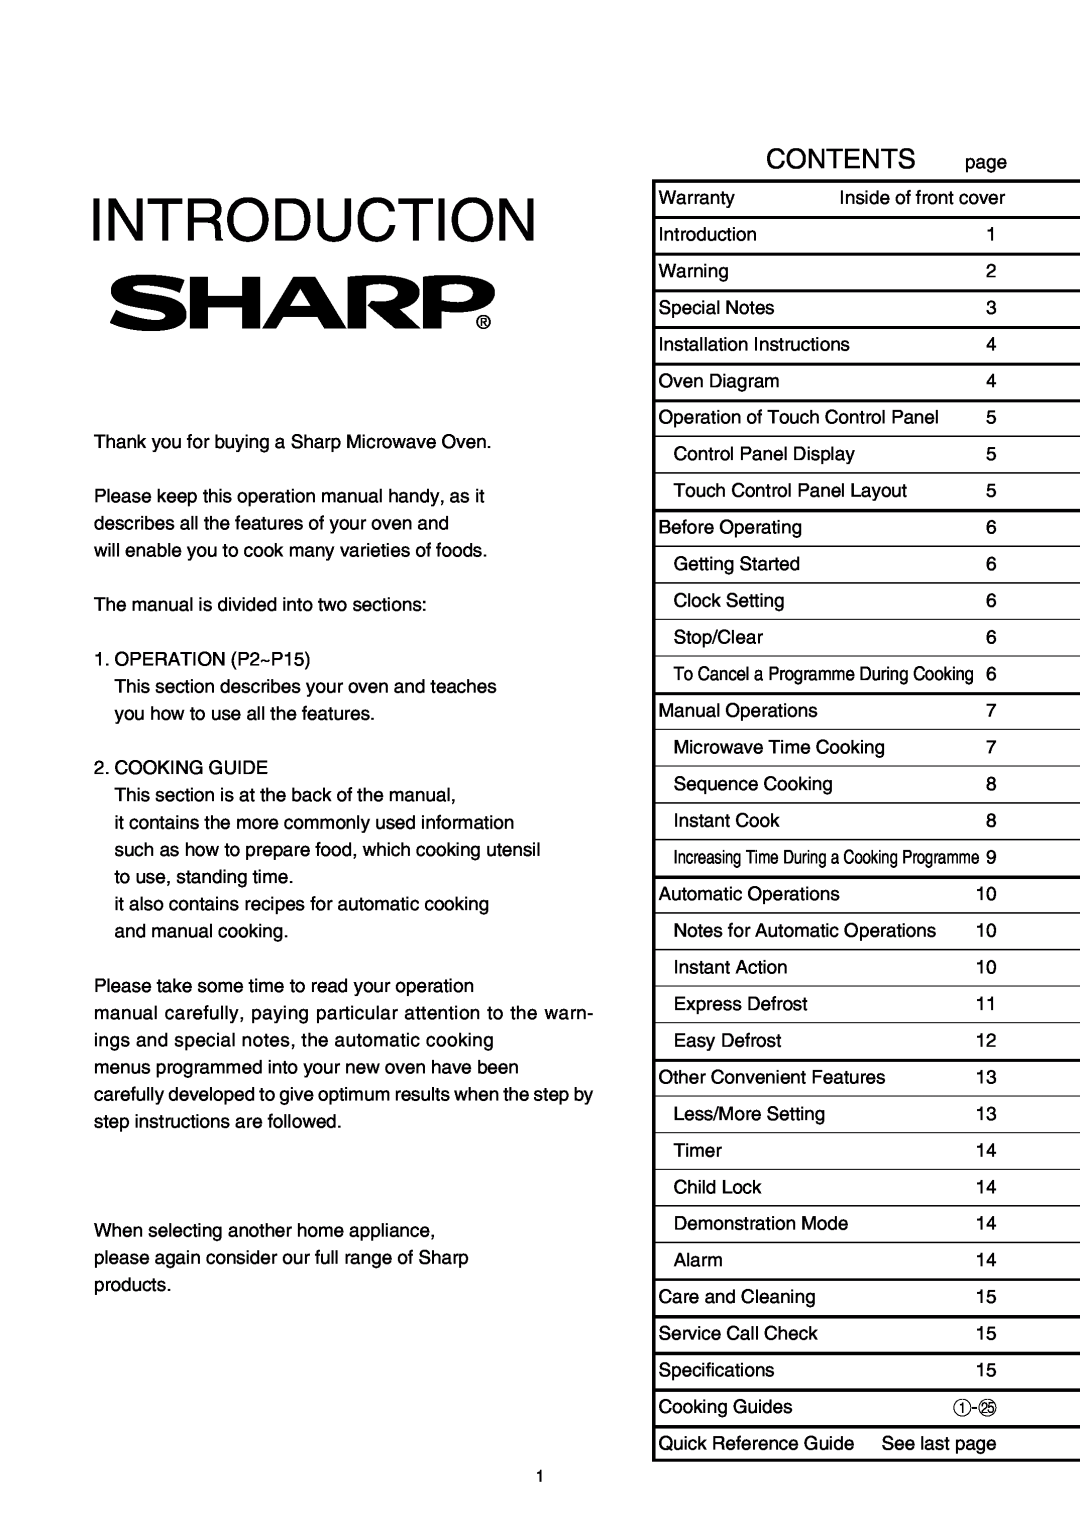 Sharp R-520E manual Introduction, Contents 